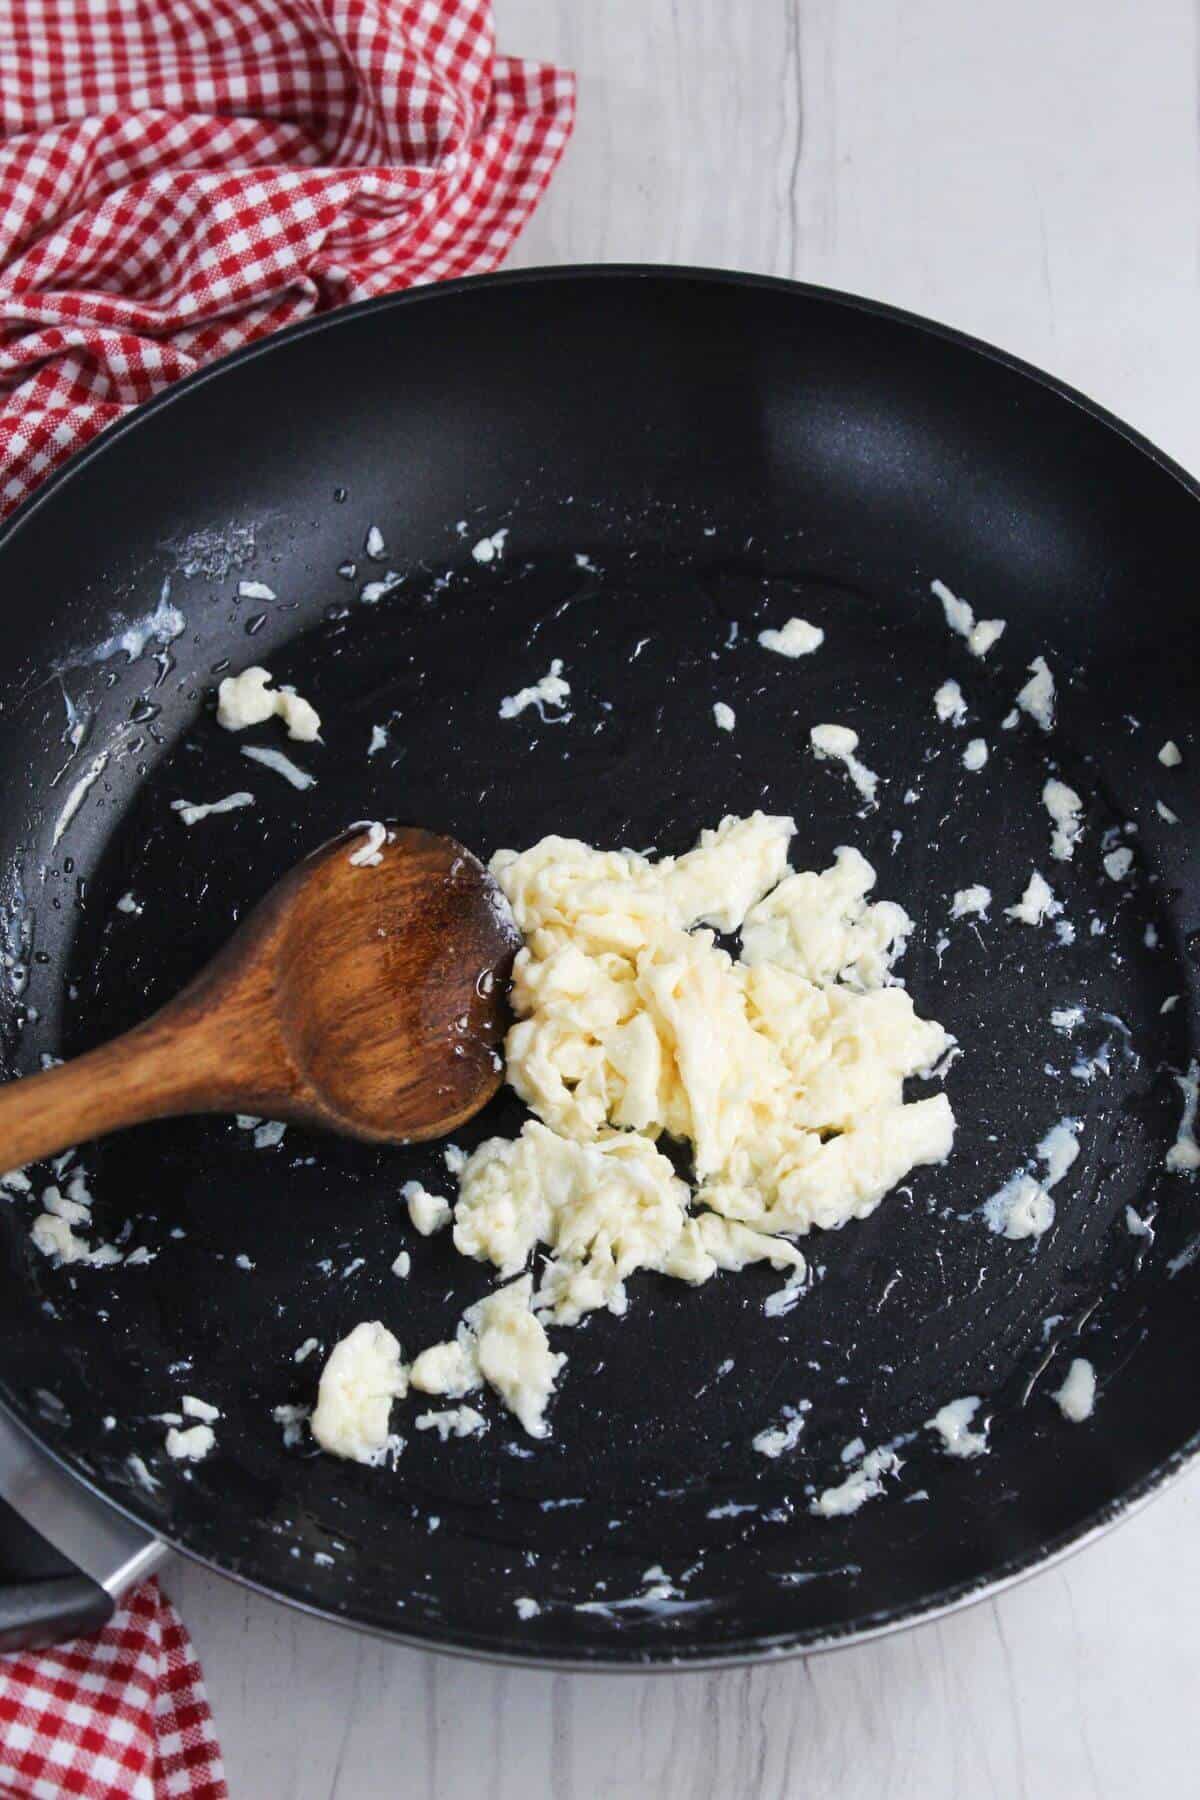 A frying pan with a wooden spoon and scrambled egg.